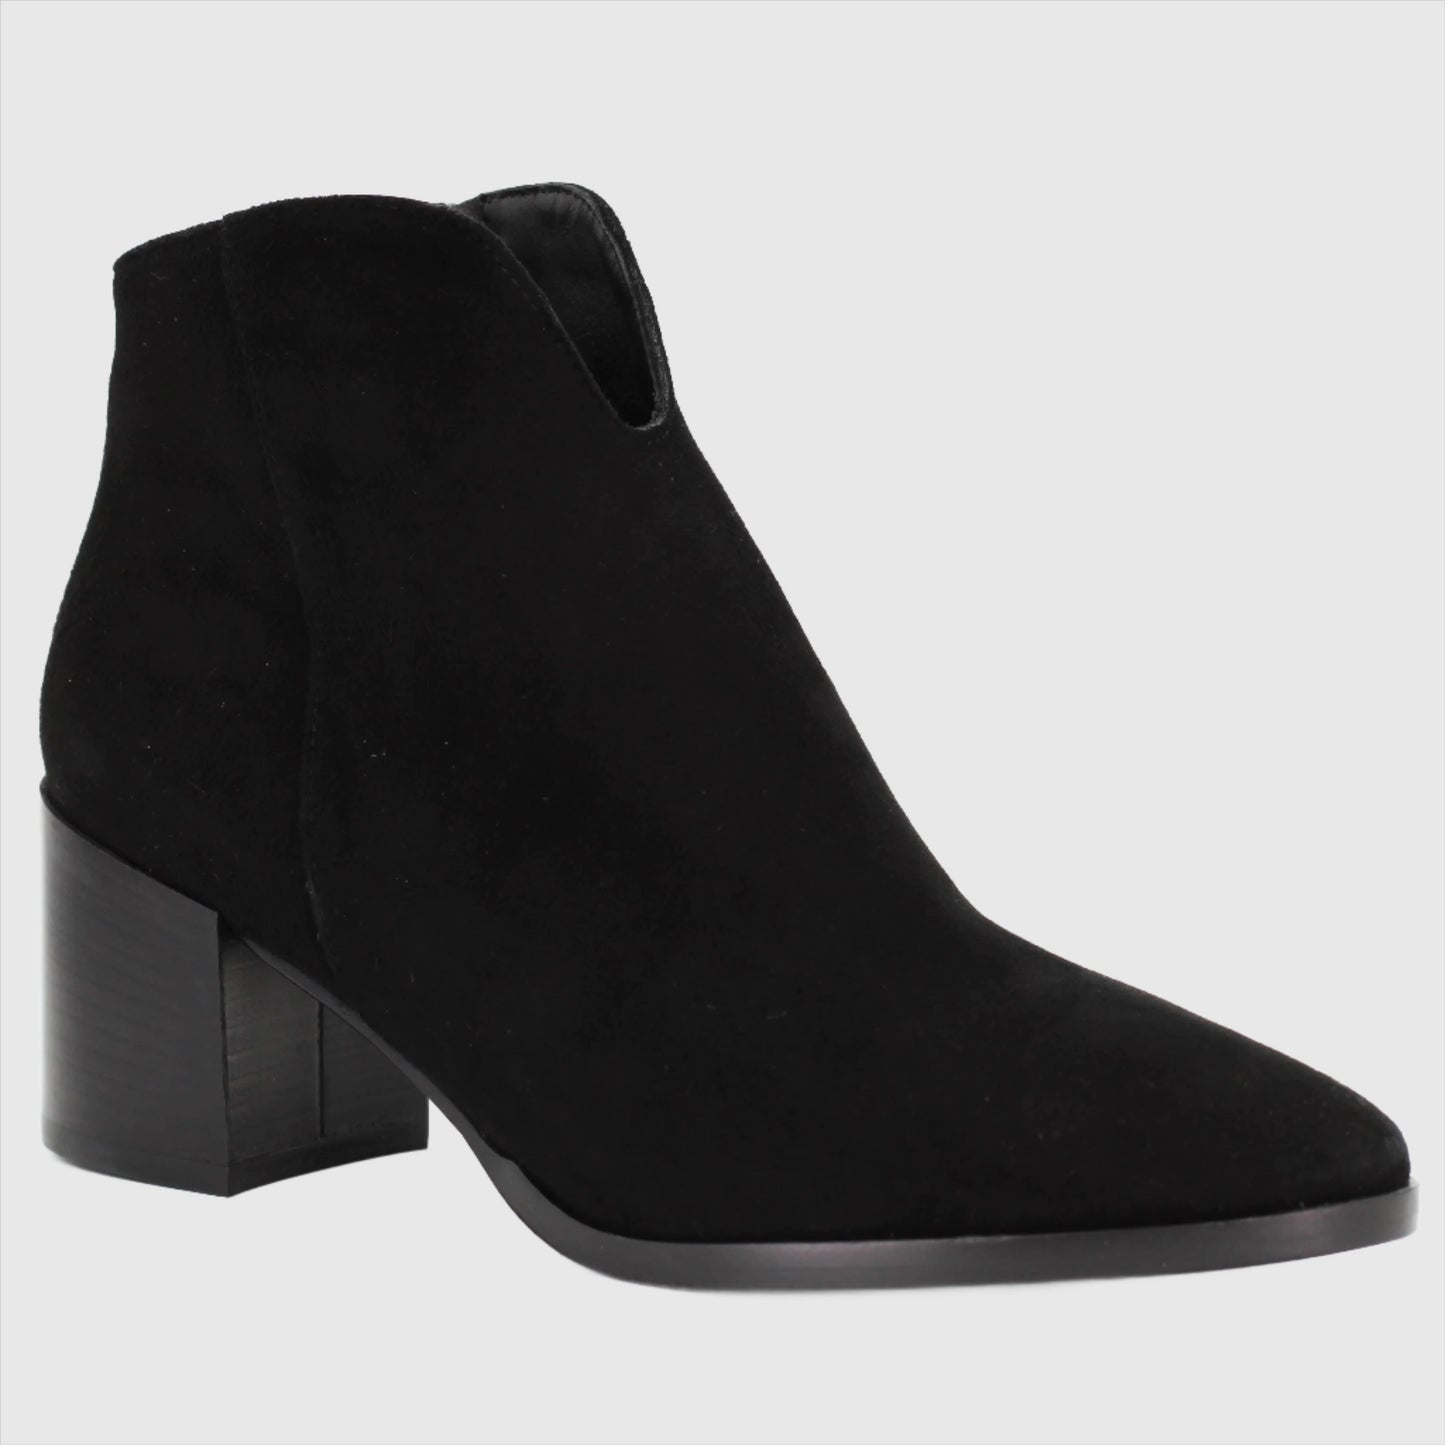 Shop Handmade Italian Leather suede ankle boot in nero (GIOIA7) or browse our range of hand-made Italian shoes in leather or suede in-store at Aliverti Cape Town, or shop online. We deliver in South Africa & offer multiple payment plans as well as accept multiple safe & secure payment methods.